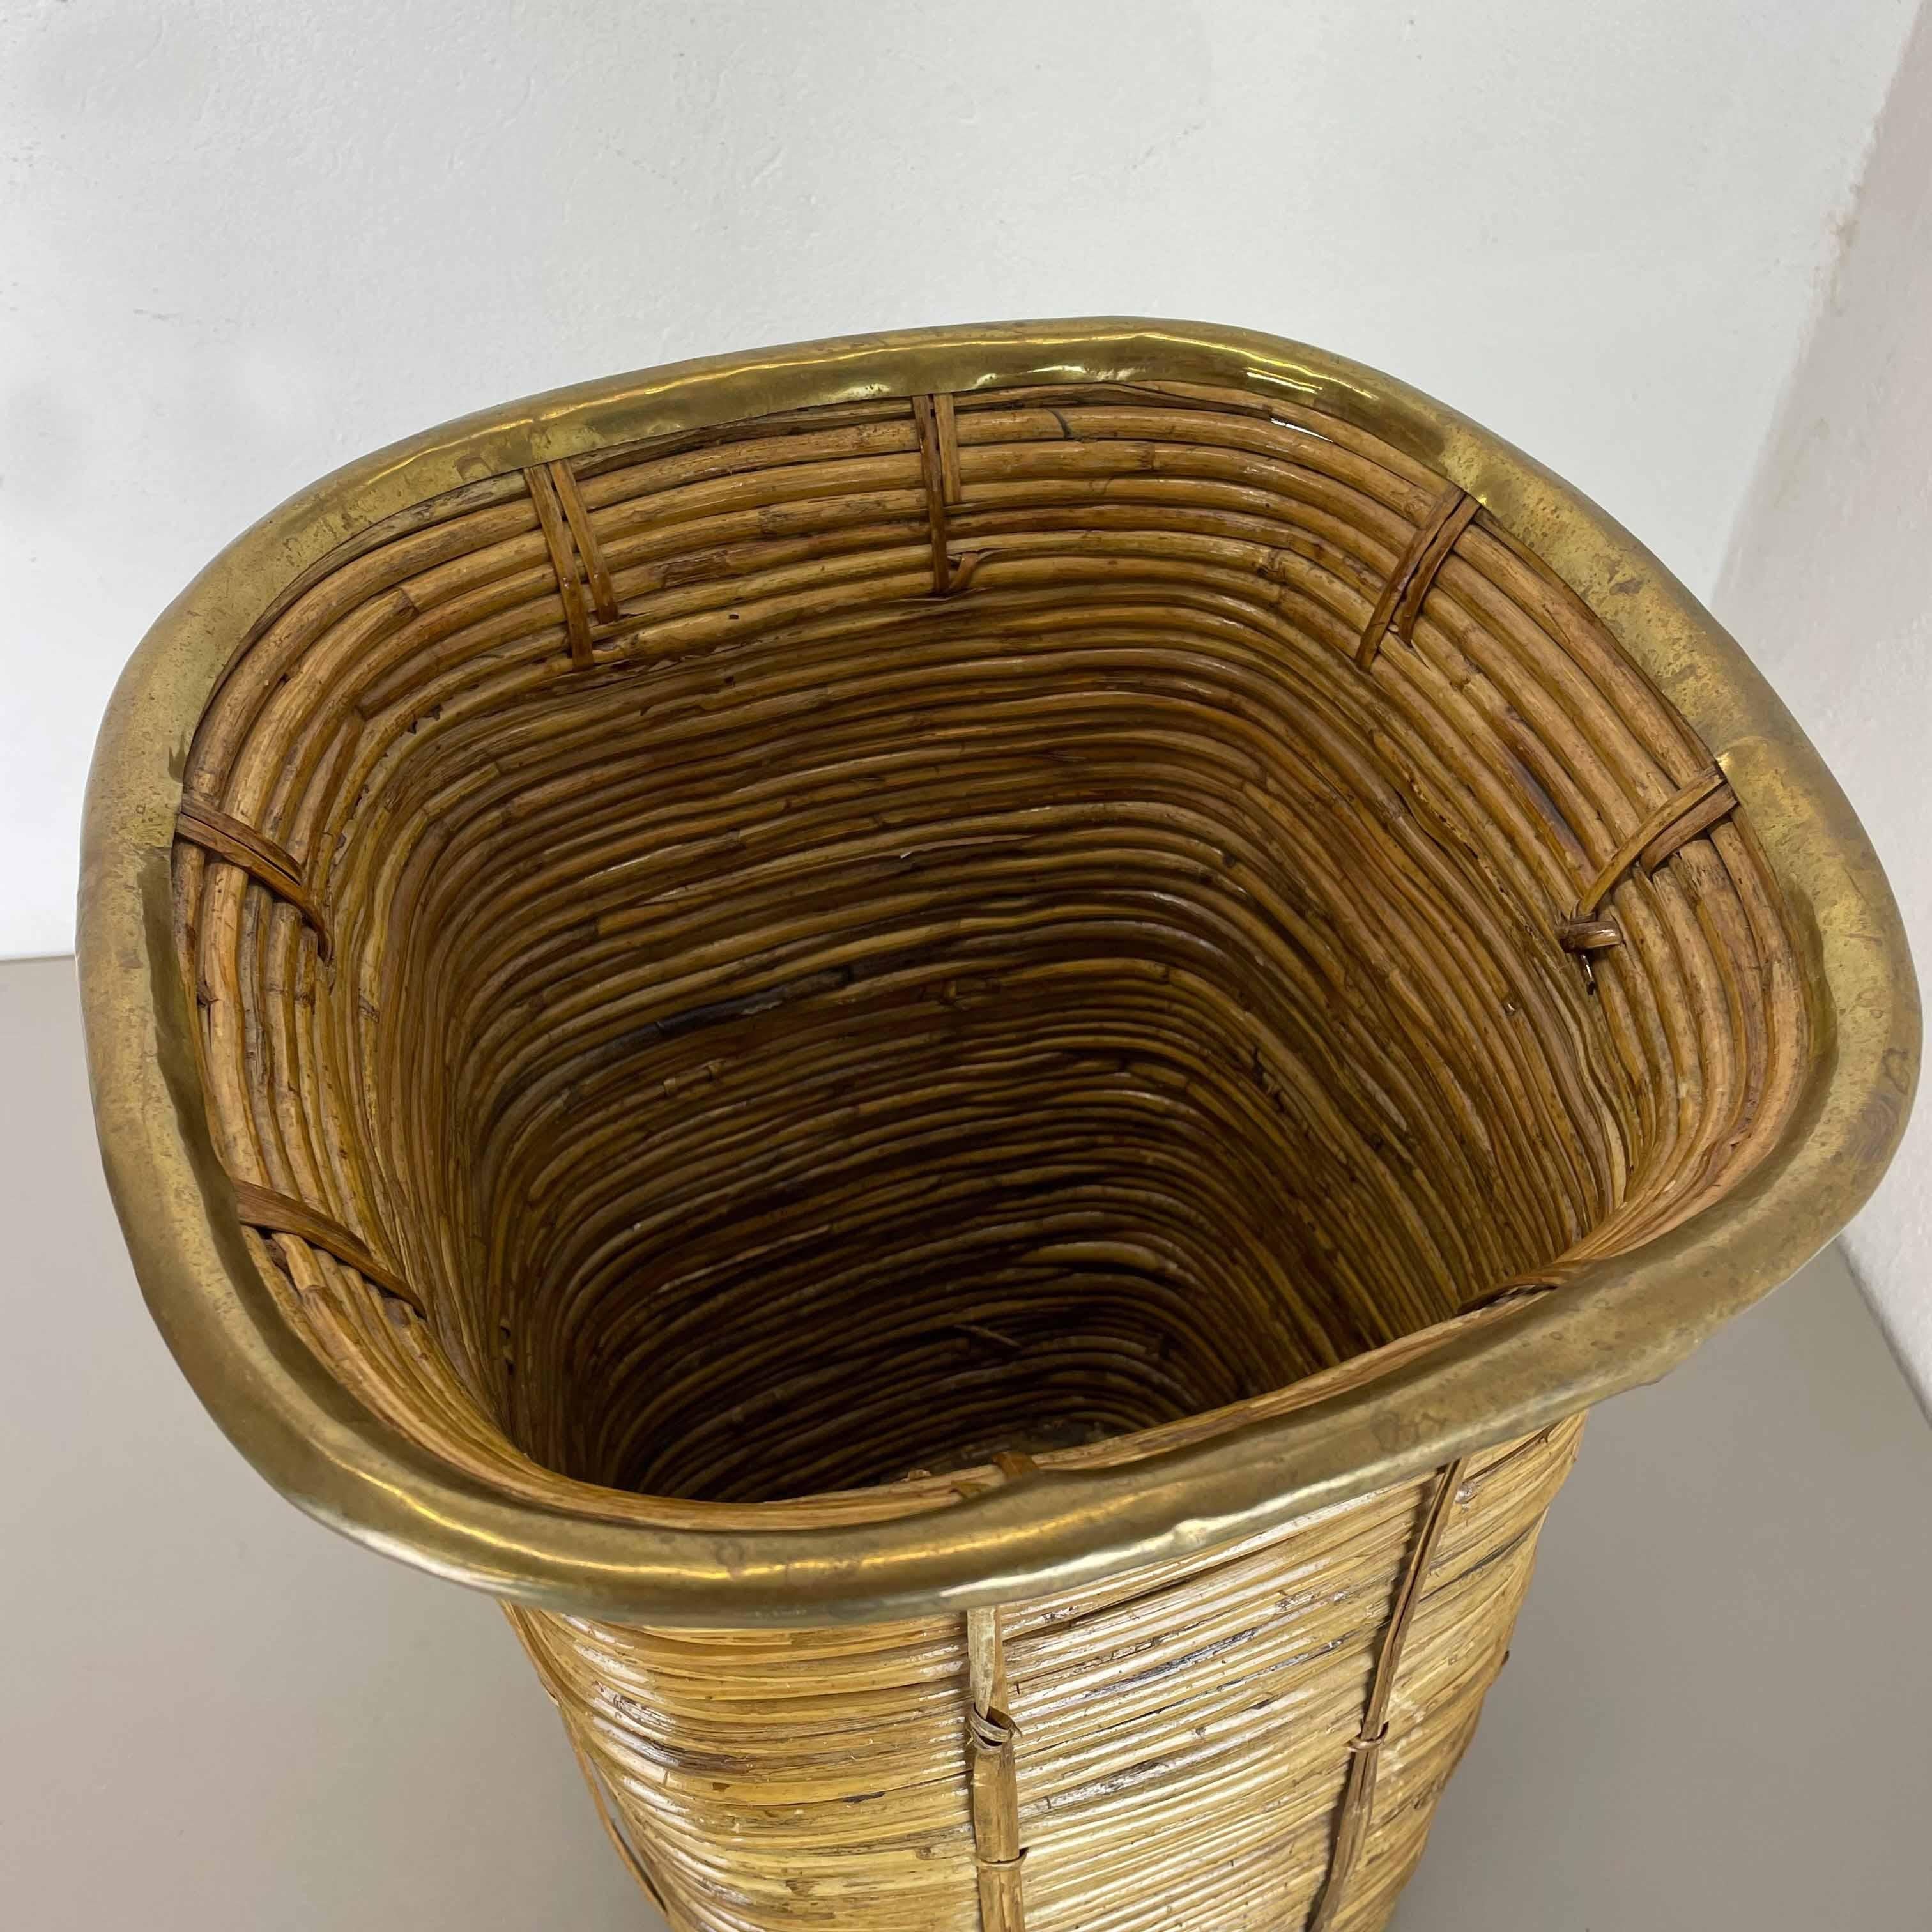 Aubock Style Rattan and Brass Bauhaus Waste Bin, Umbrella Stand, France, 1960s For Sale 9